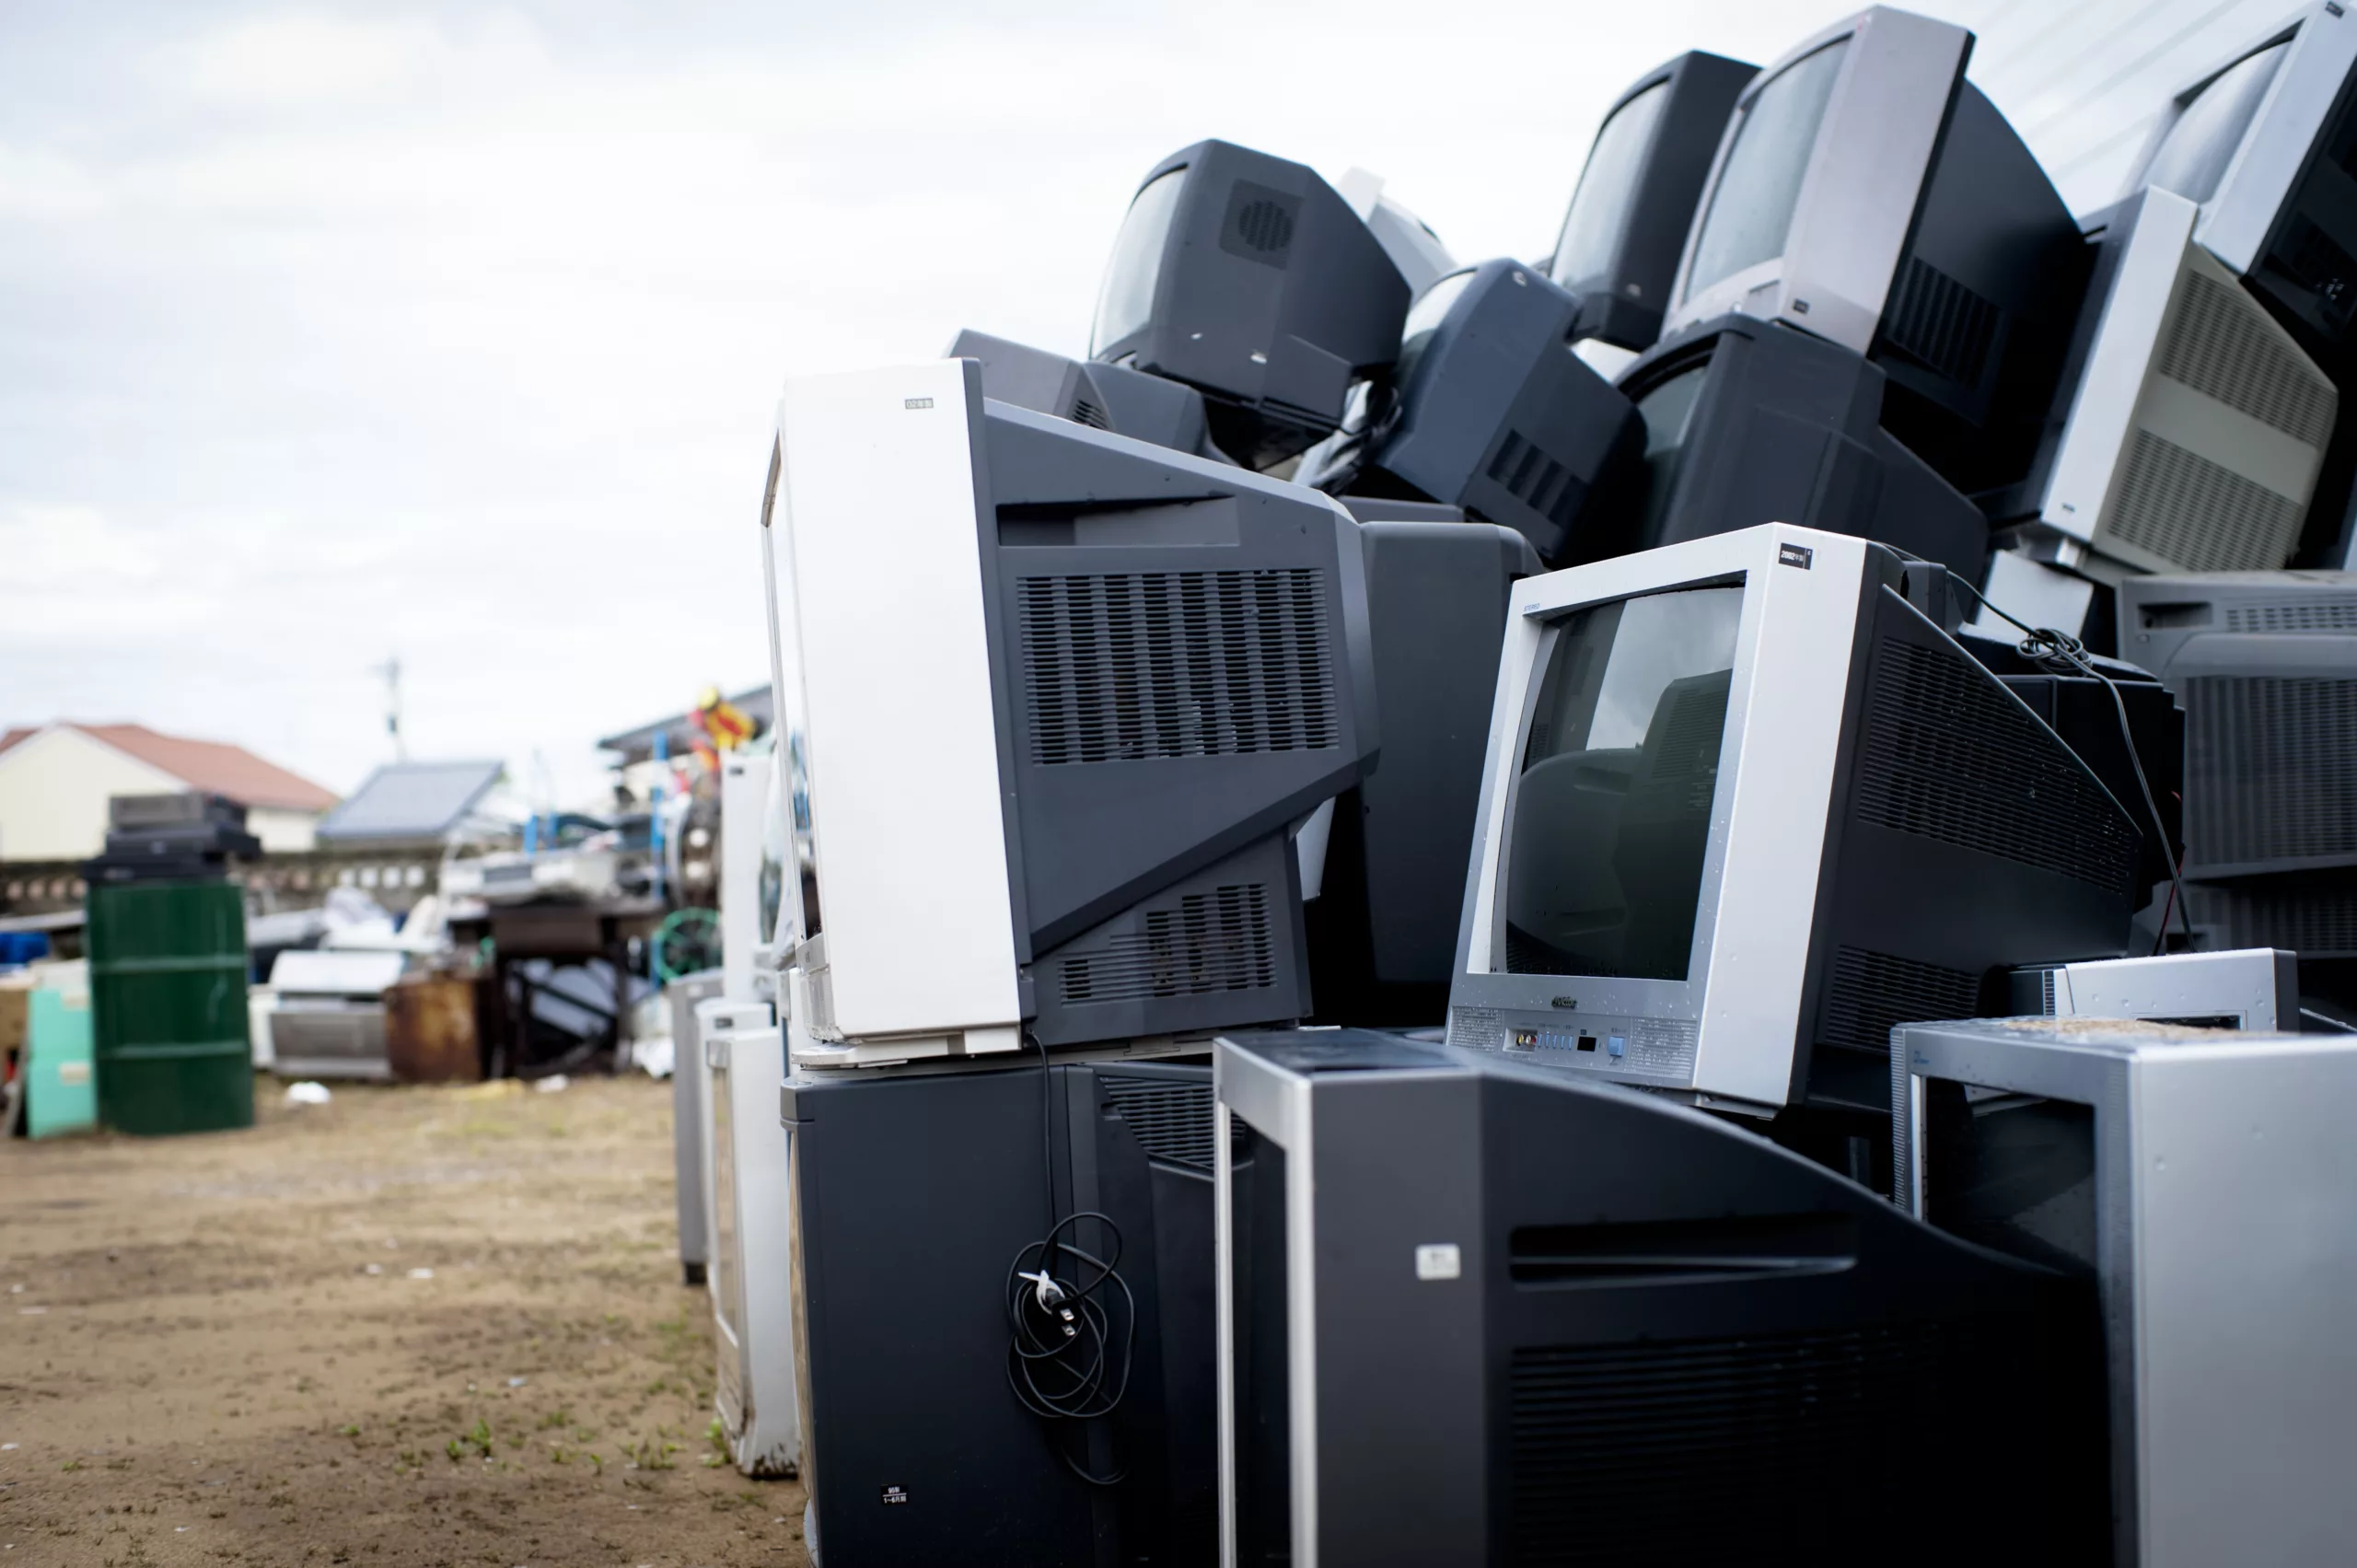 CRT Glass Landfill Disposal Likely to Continue